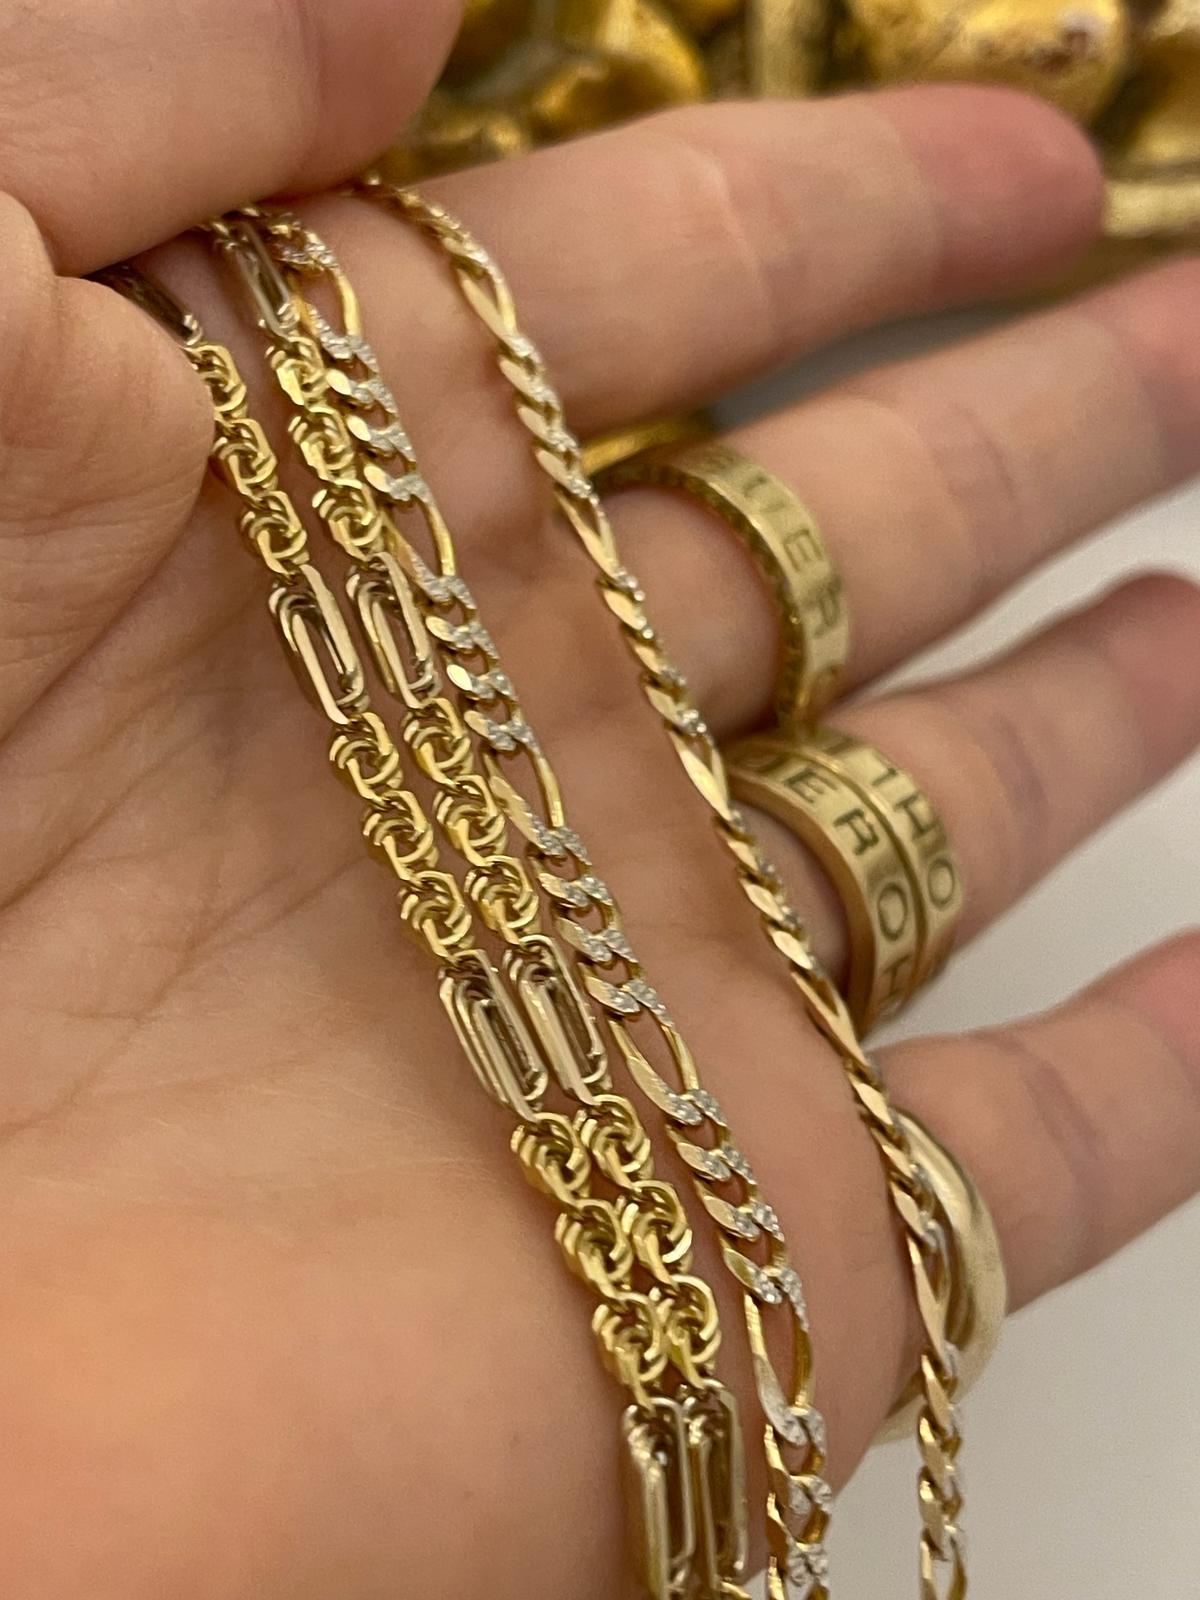 18k white and yellow gold chain
Curb link style
Ready to ship  

grams
cm long
link width: 

solid links not hollow
white gold detail*


ABOUT THE BRAND
Once shrouded in mystery, the story of Ohliguer emerged from the not-too-distant past. A great